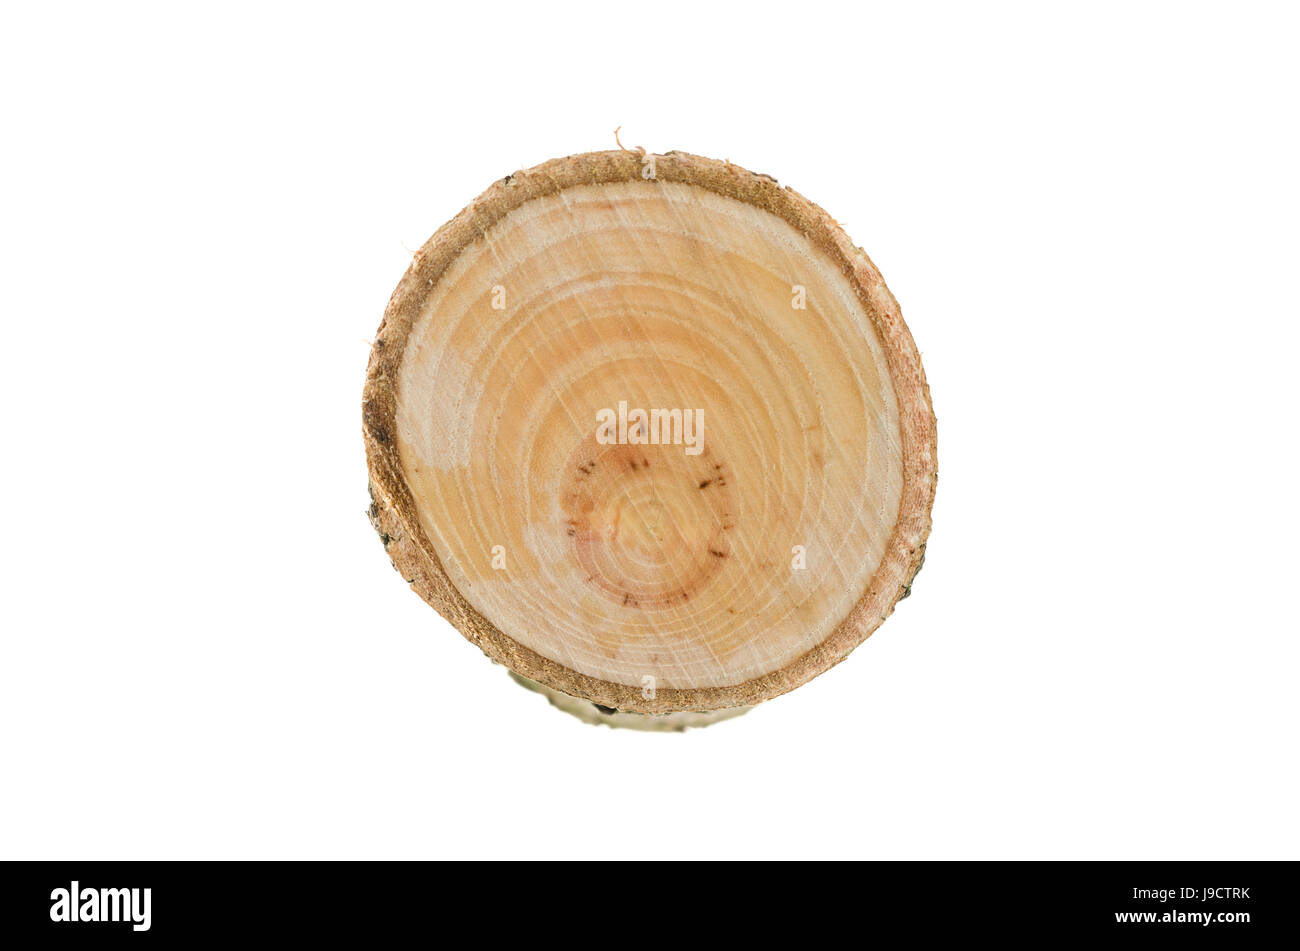 Wooden stump isolated on the white background. Stock Photo